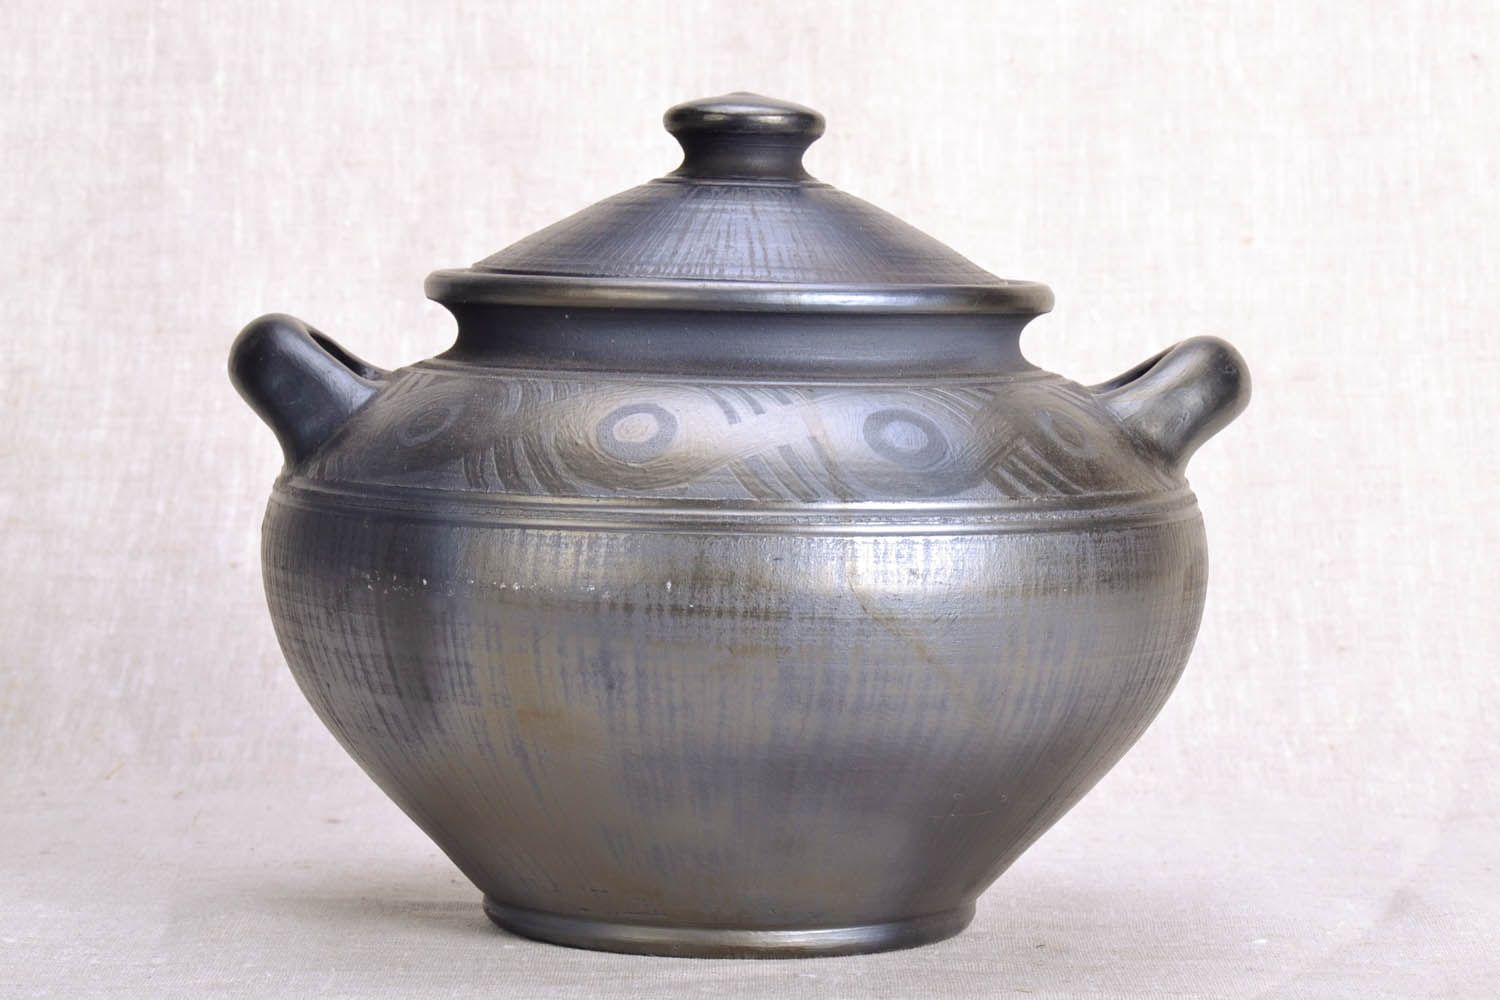 Large pot with a lid made of black ceramics.